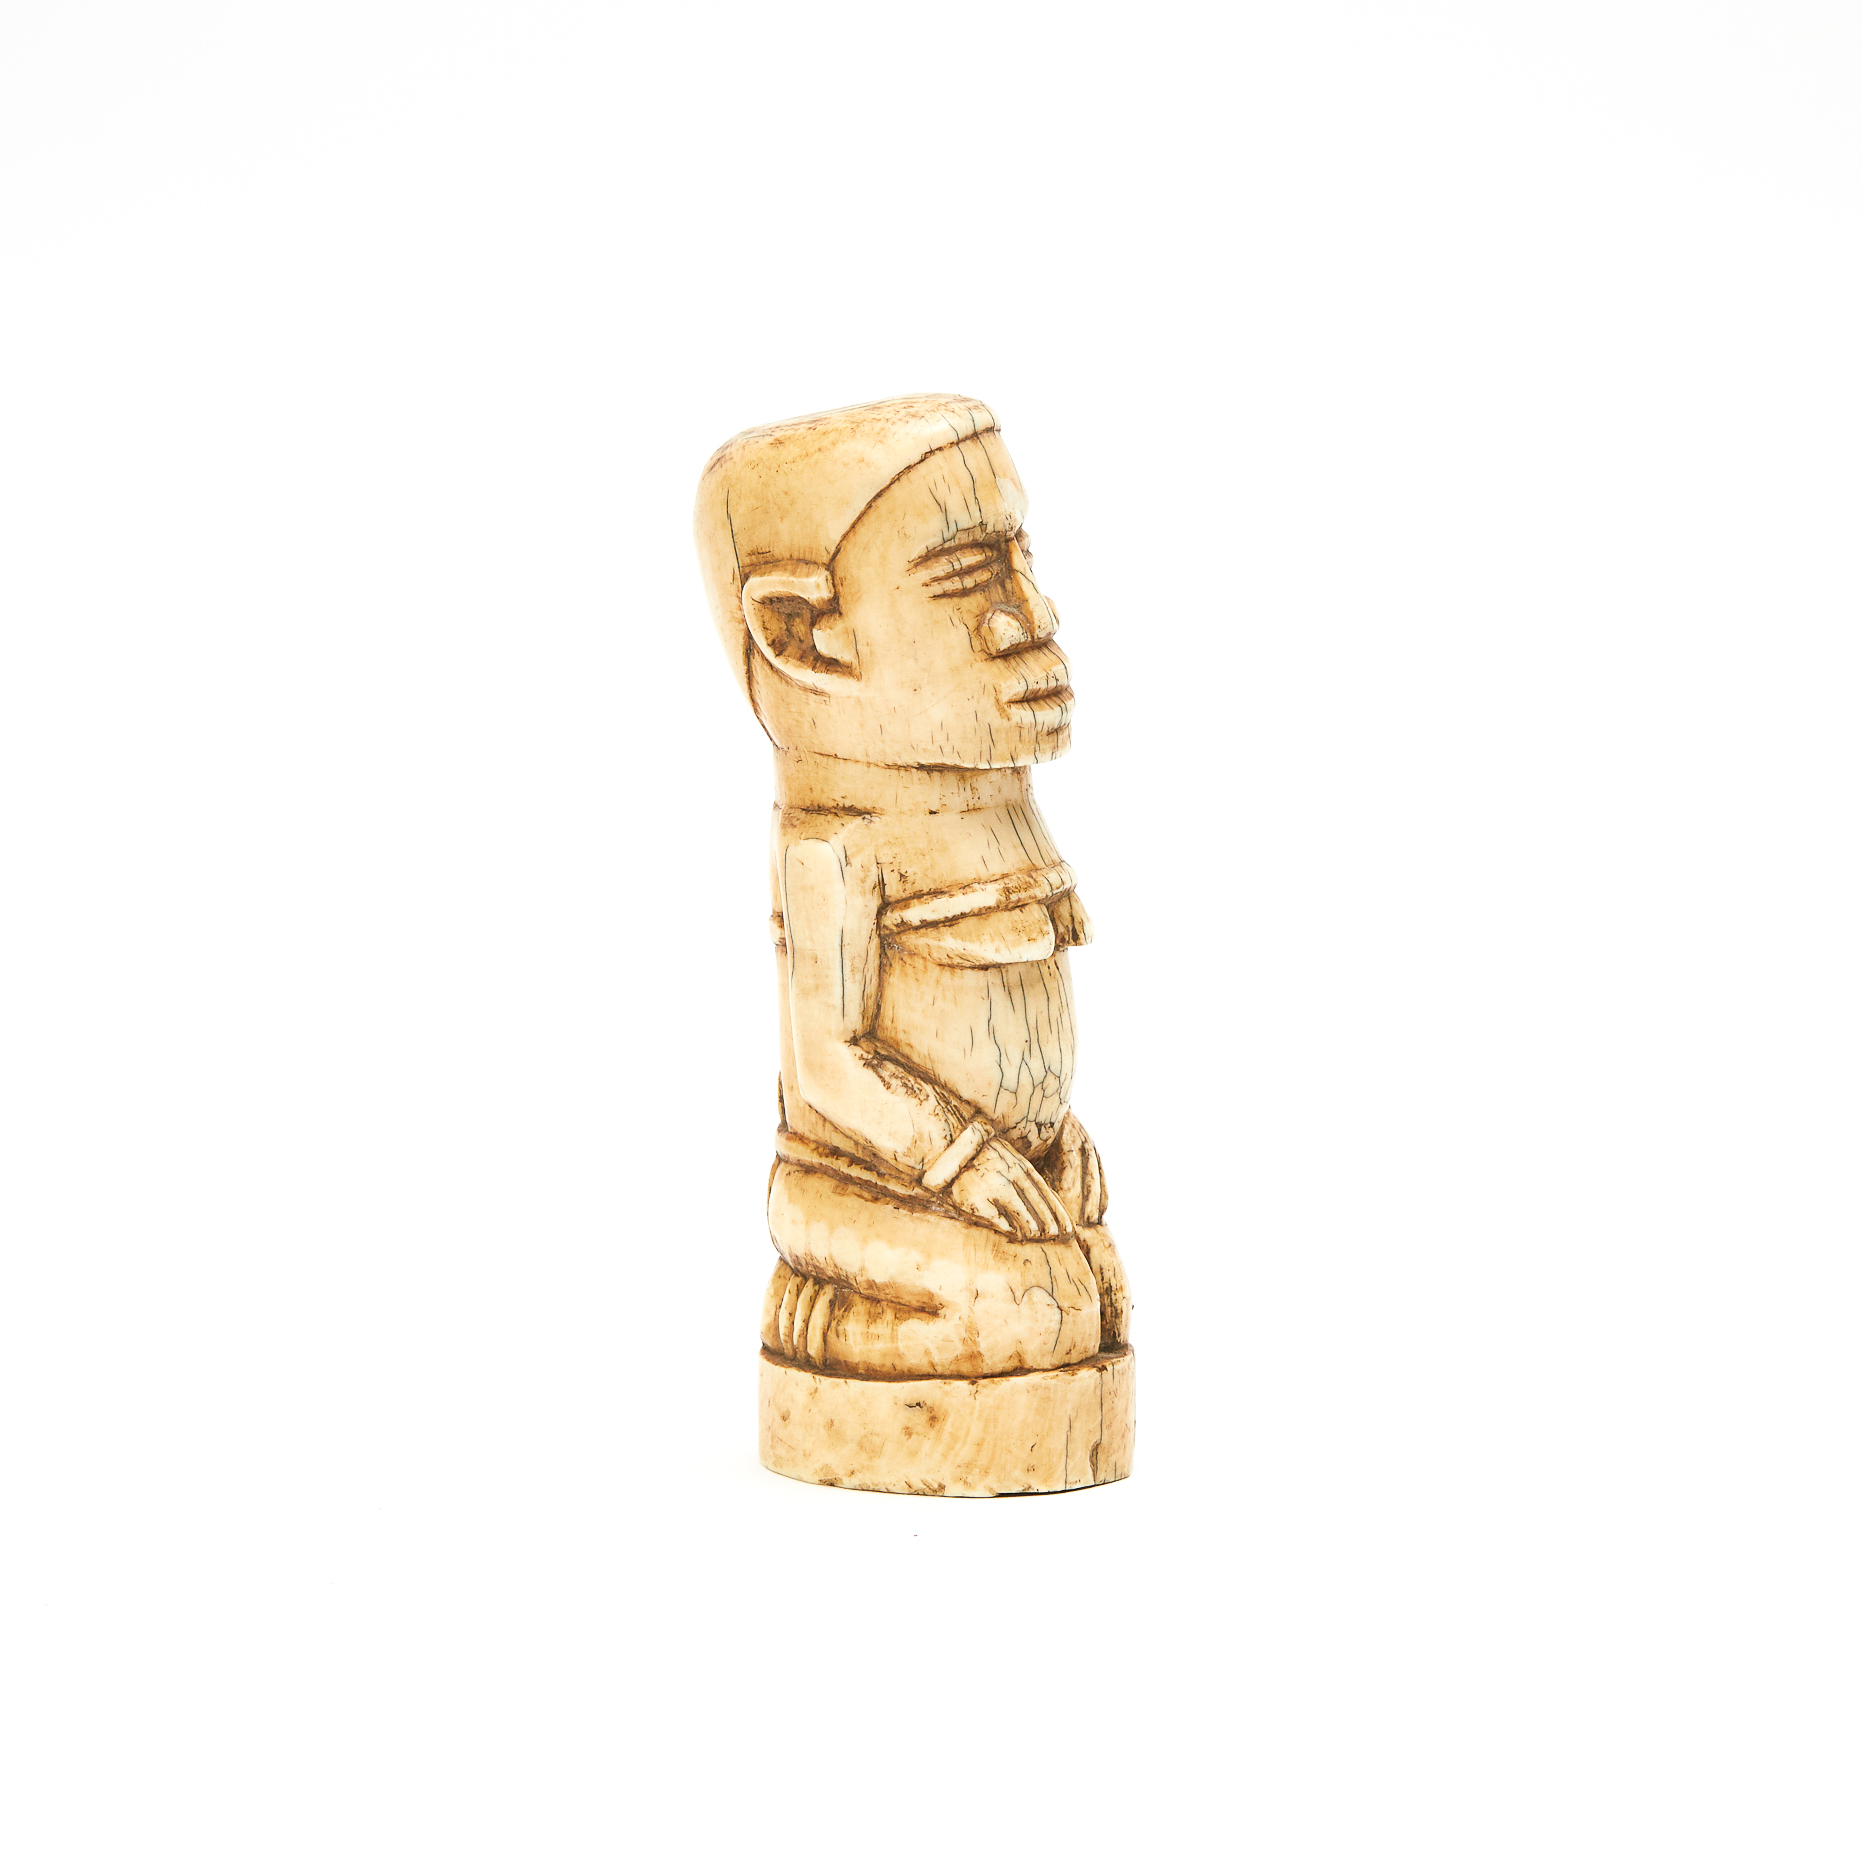 Kongo Carved Ivory Kneeling Figure, early to mid 20th century, Democratic Republic of Congo, Central Africa